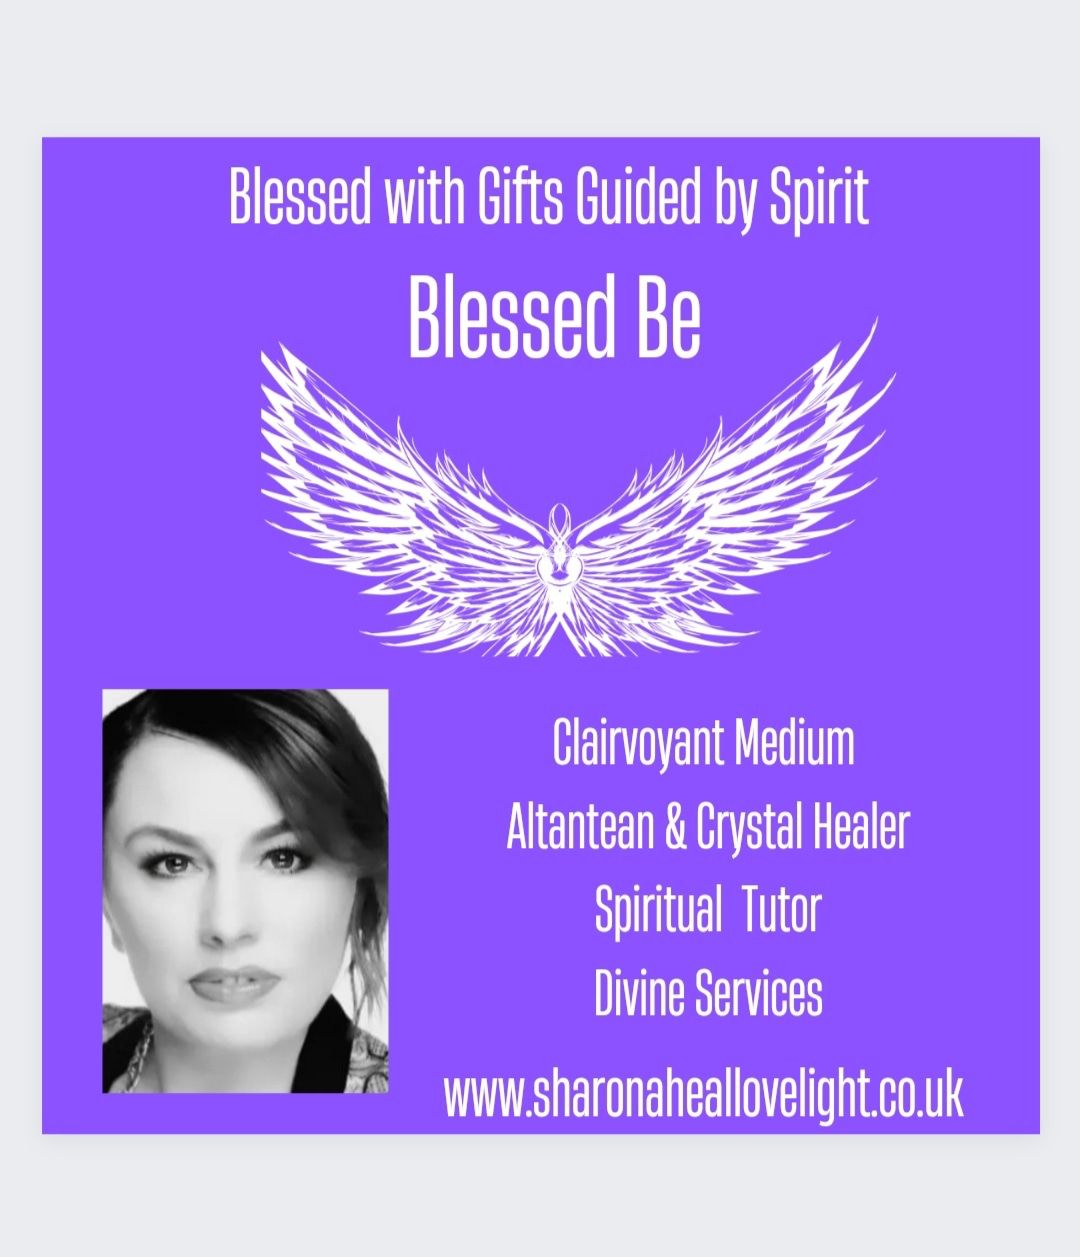 Lot 62: Blessed Be - 1 months Frequency Therapy or Spiritual Guidance 